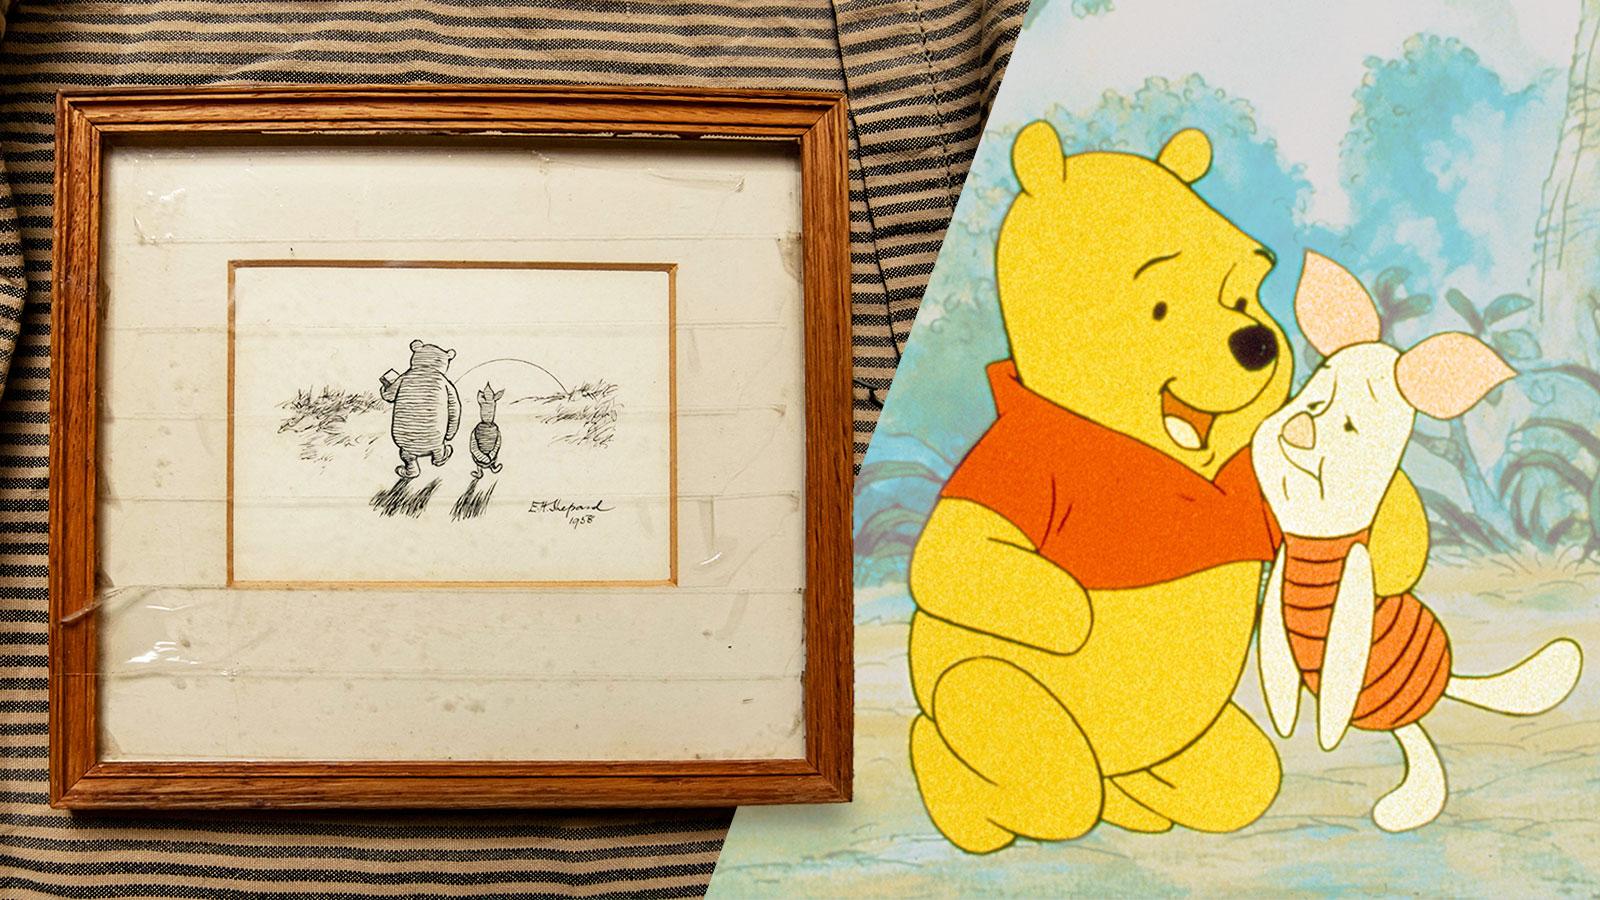 Forgotten Winnie-the-Pooh sketch in a frame, A scene from Winnie the Pooh series